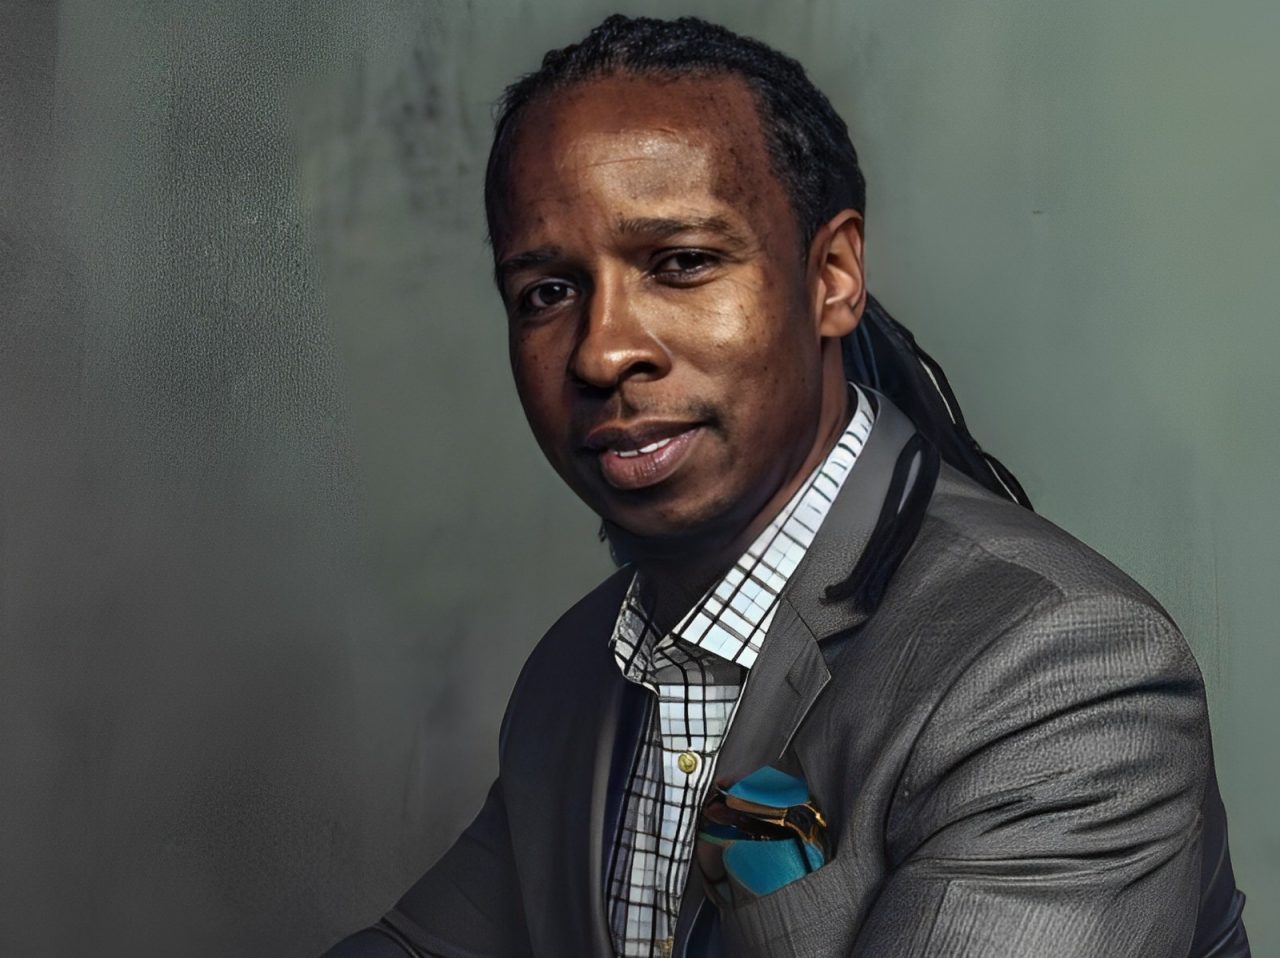 Ibram X. Kendi: Only 14 percent of people receiving my diagnosis are likely to be alive five years later. Today, I can officially say I am a cancer survivor.